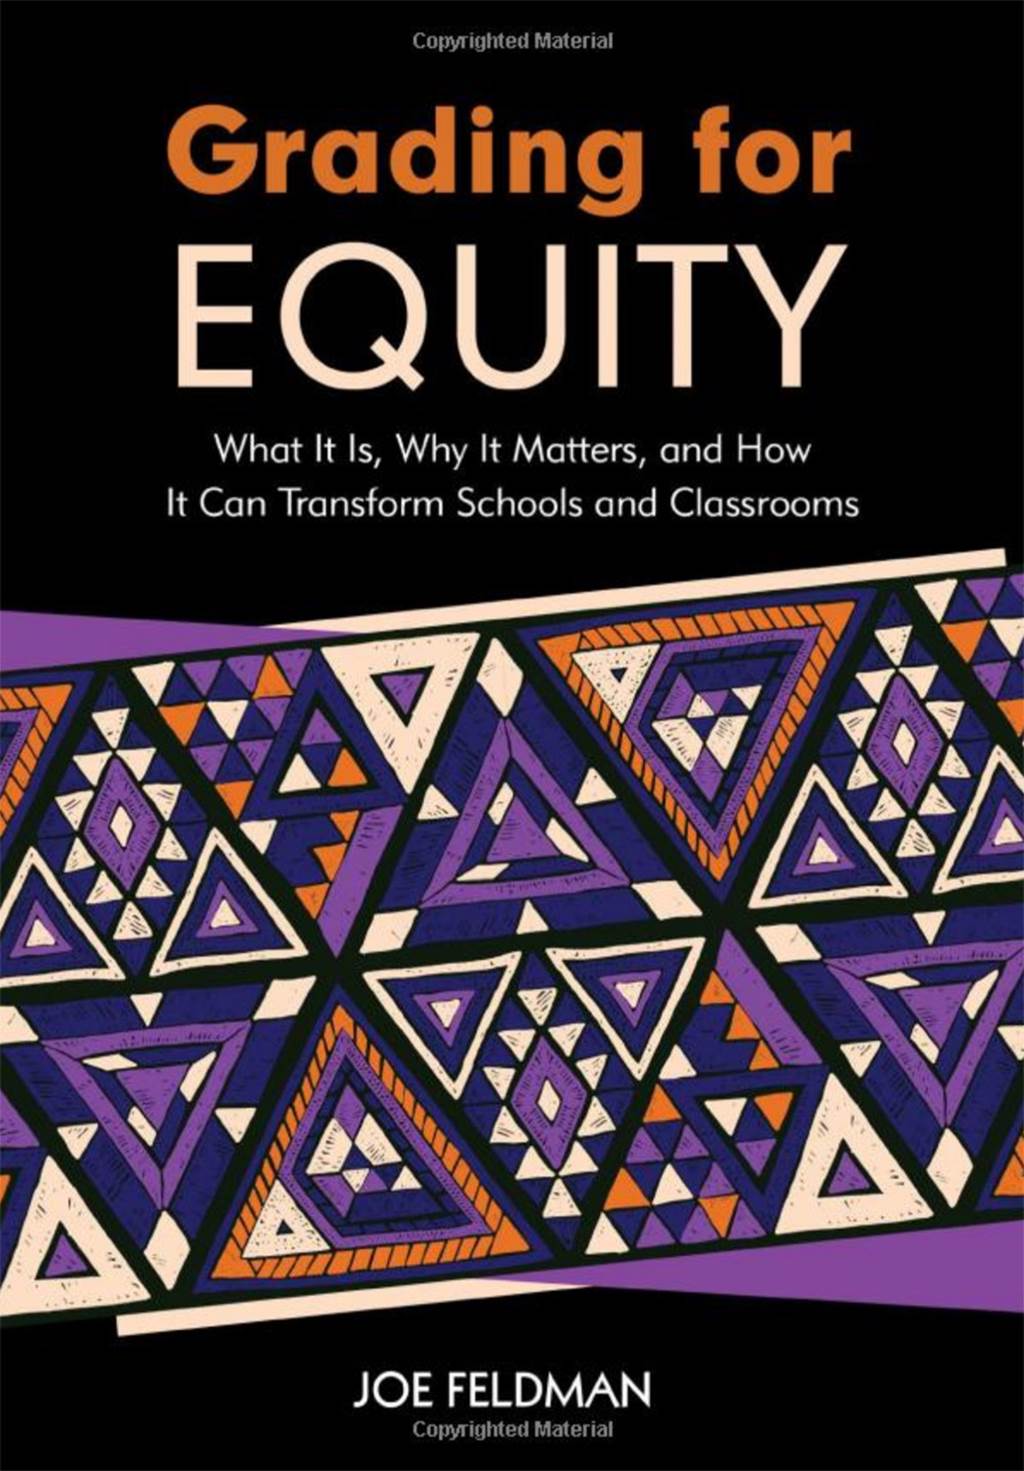 Grading for equity book cover